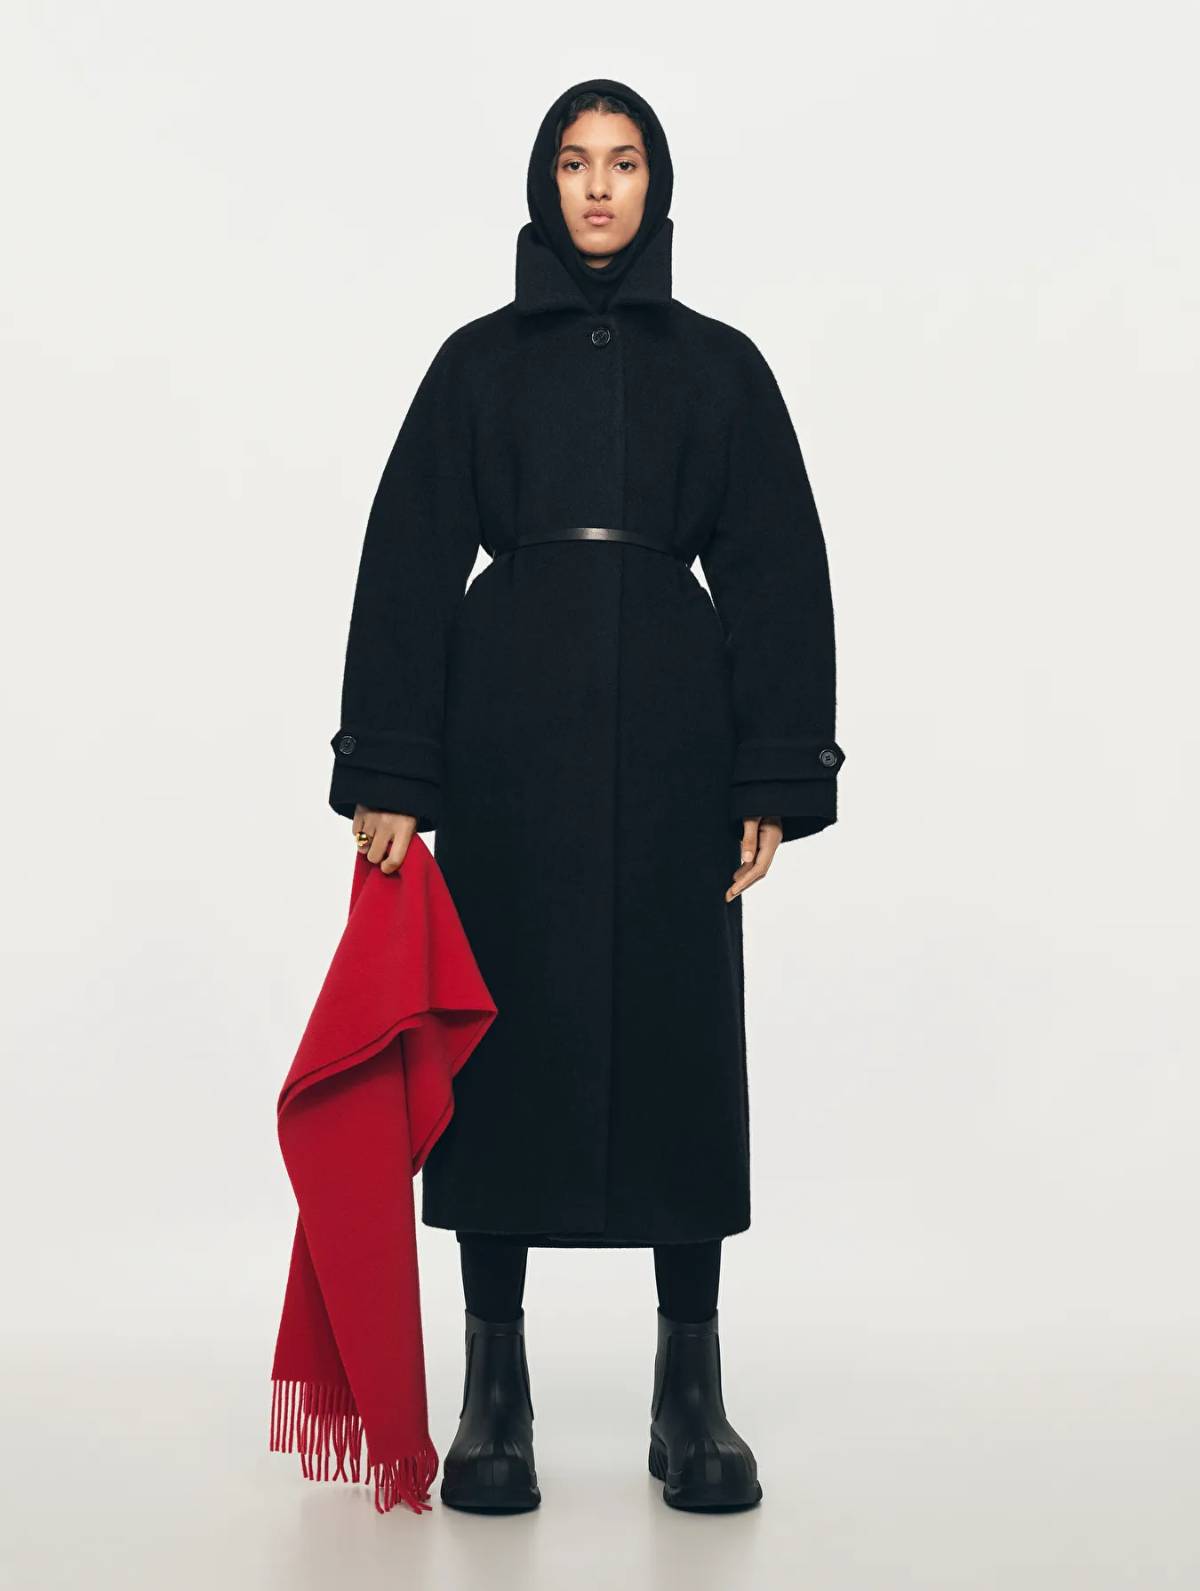 Arket Holiday Essentials Red Scarf, Cashmere Hood, Black Oversized Wool Coat, adidas adiFOM Superstar Boots